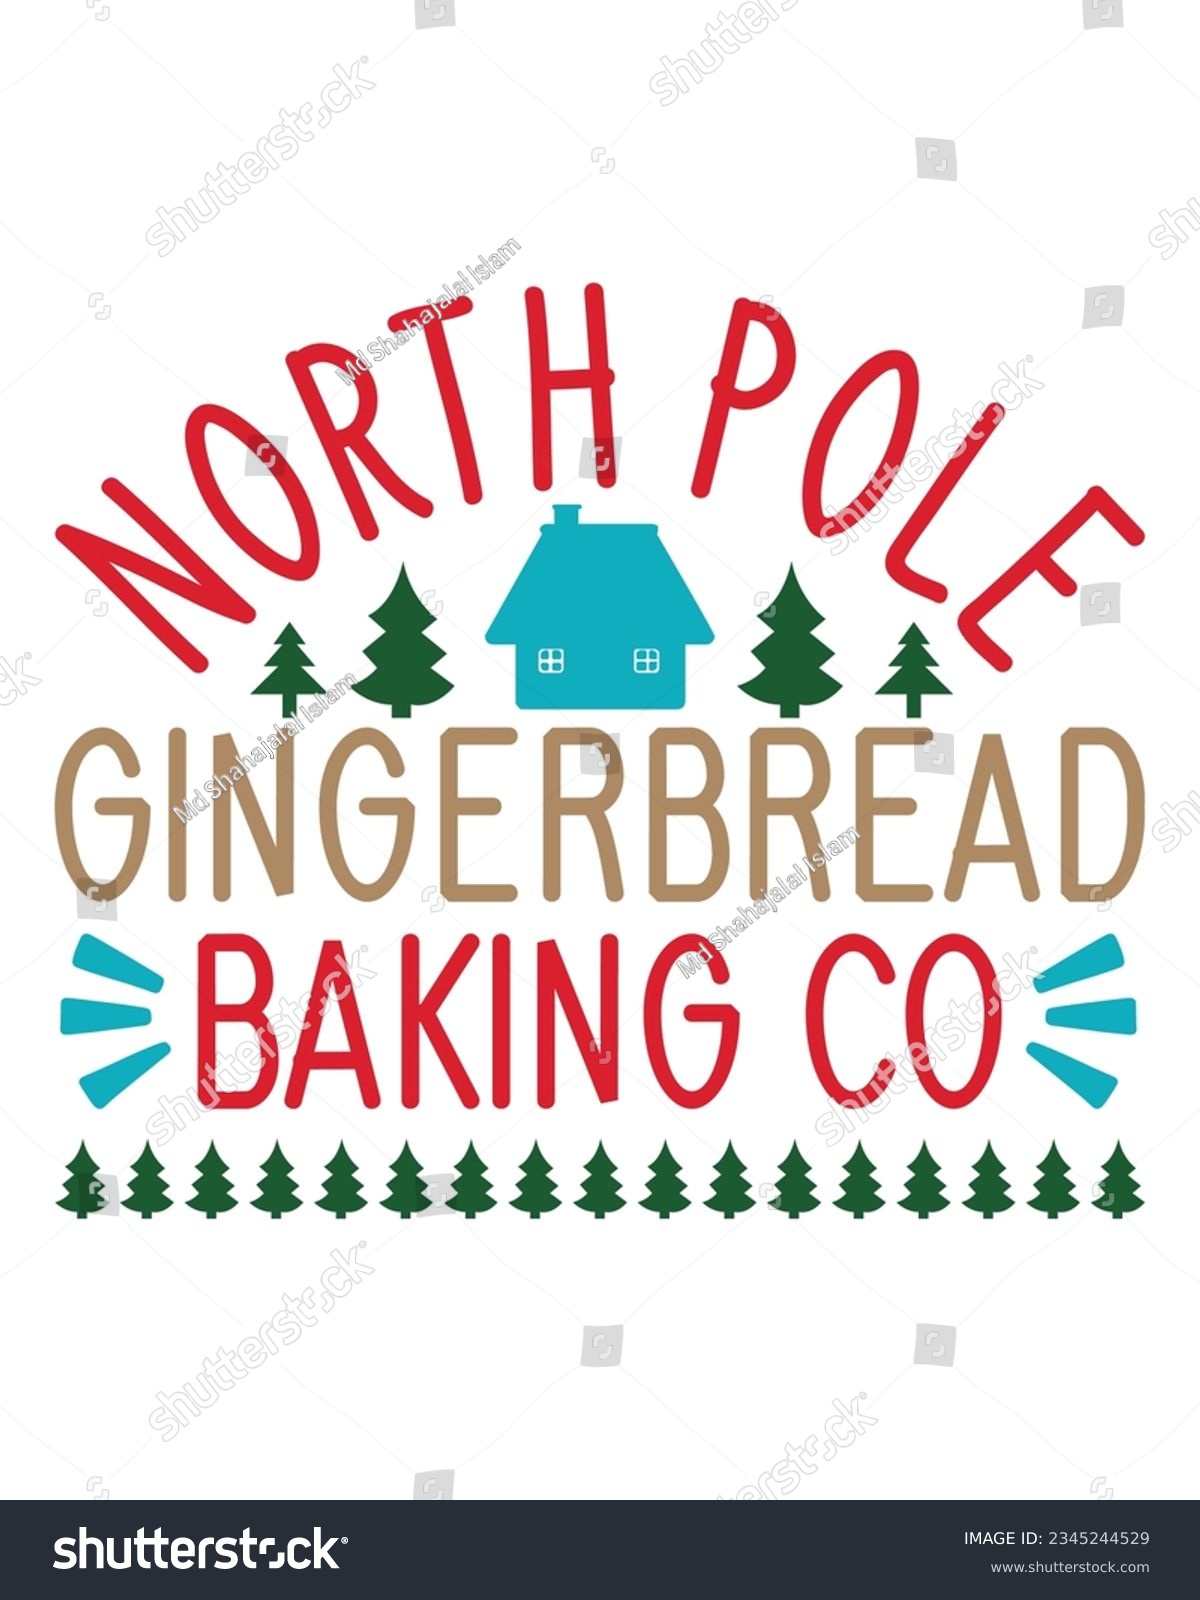 SVG of North pole Gingerbread baking co, Christmas SVG, Funny Christmas Quotes, Winter SVG, Merry Christmas, Santa SVG, t shirts design, typography, vintage, Holiday shirt svg